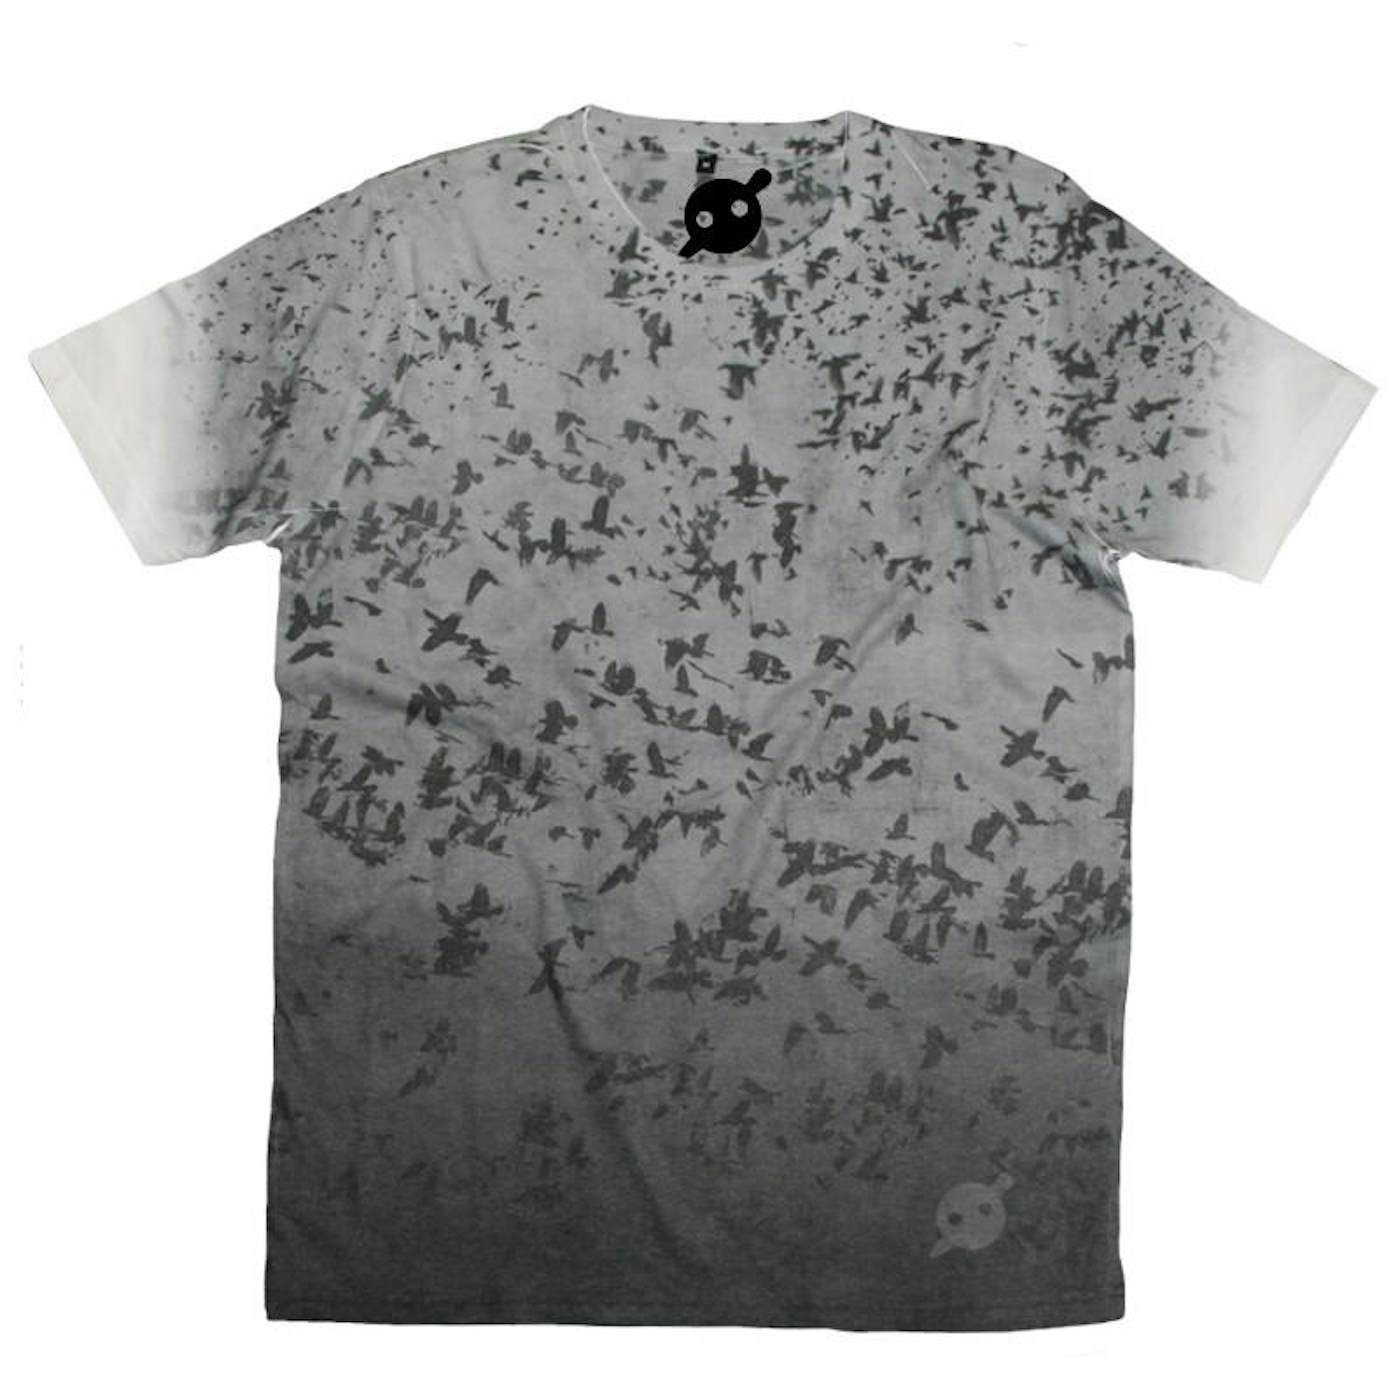 Knife Party All Over Crows T-Shirt